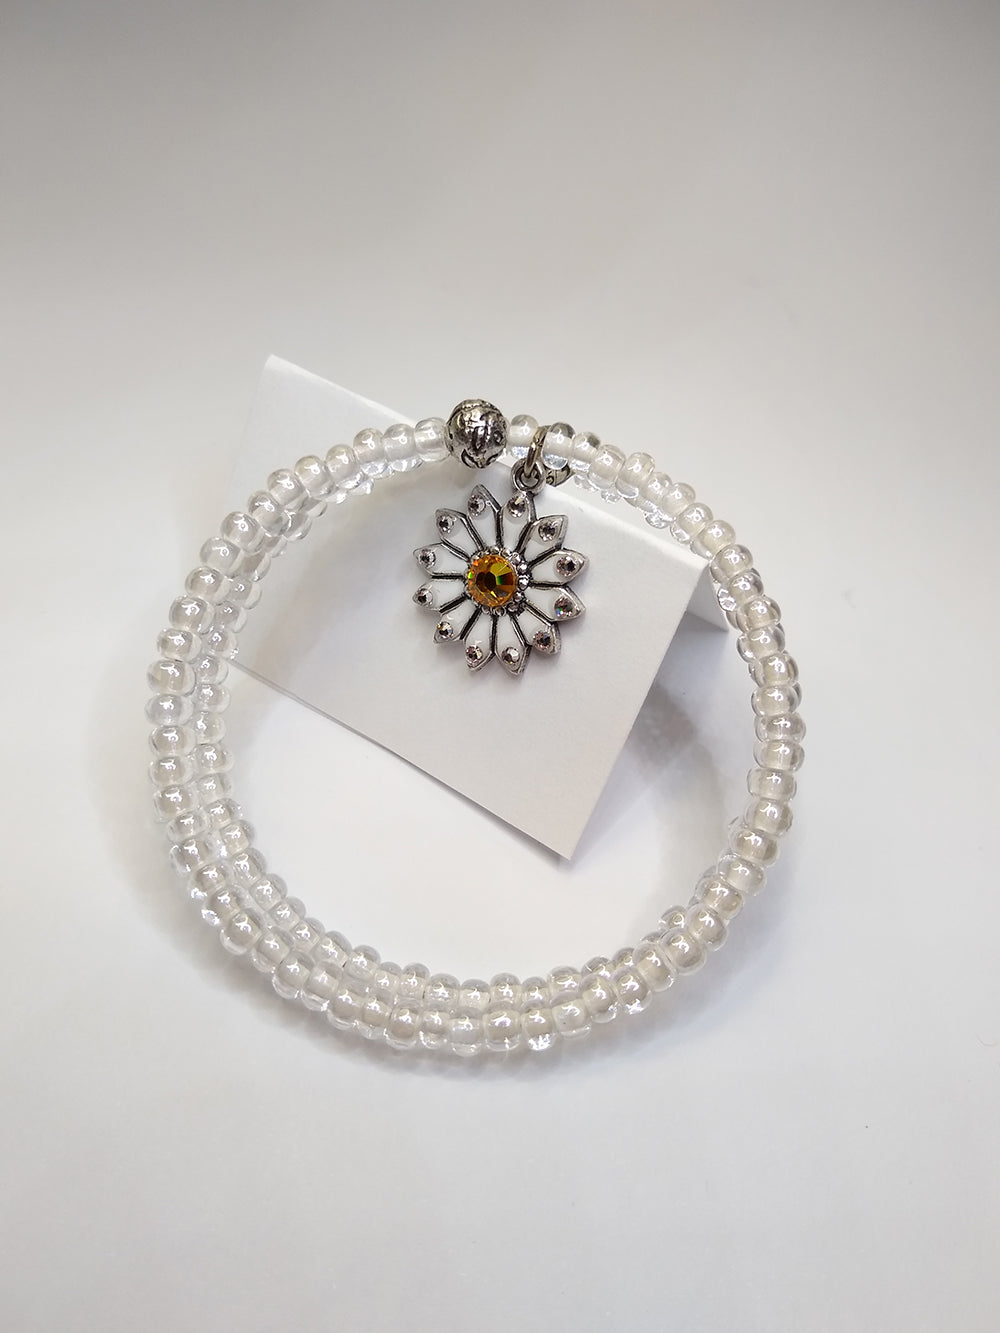 Silver and White Enamel Daisy Yellow Crystal Bracelet